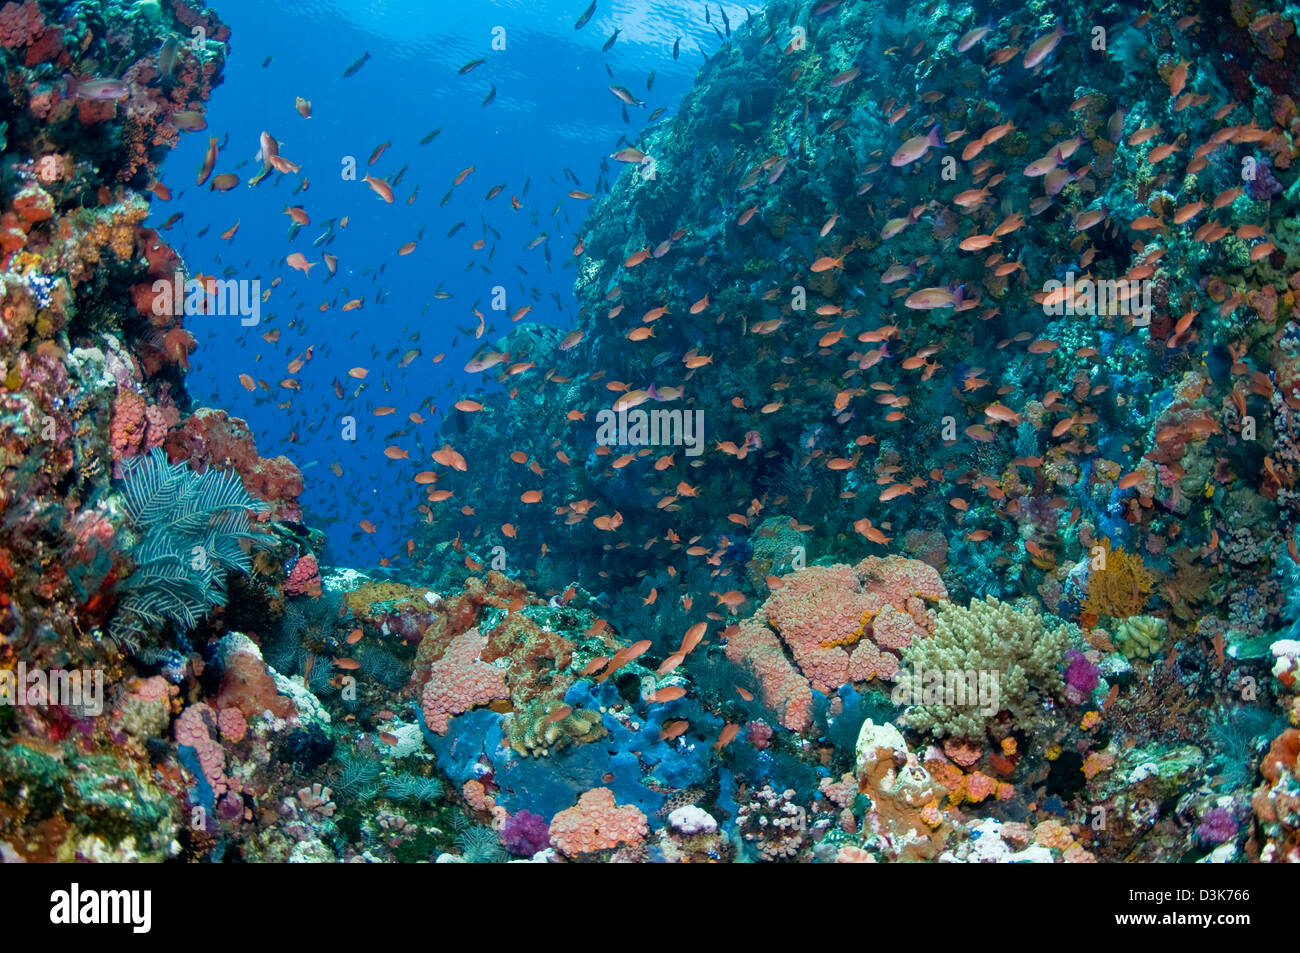 Reef scene with corals and fish, Komodo, Indonesia. Stock Photo